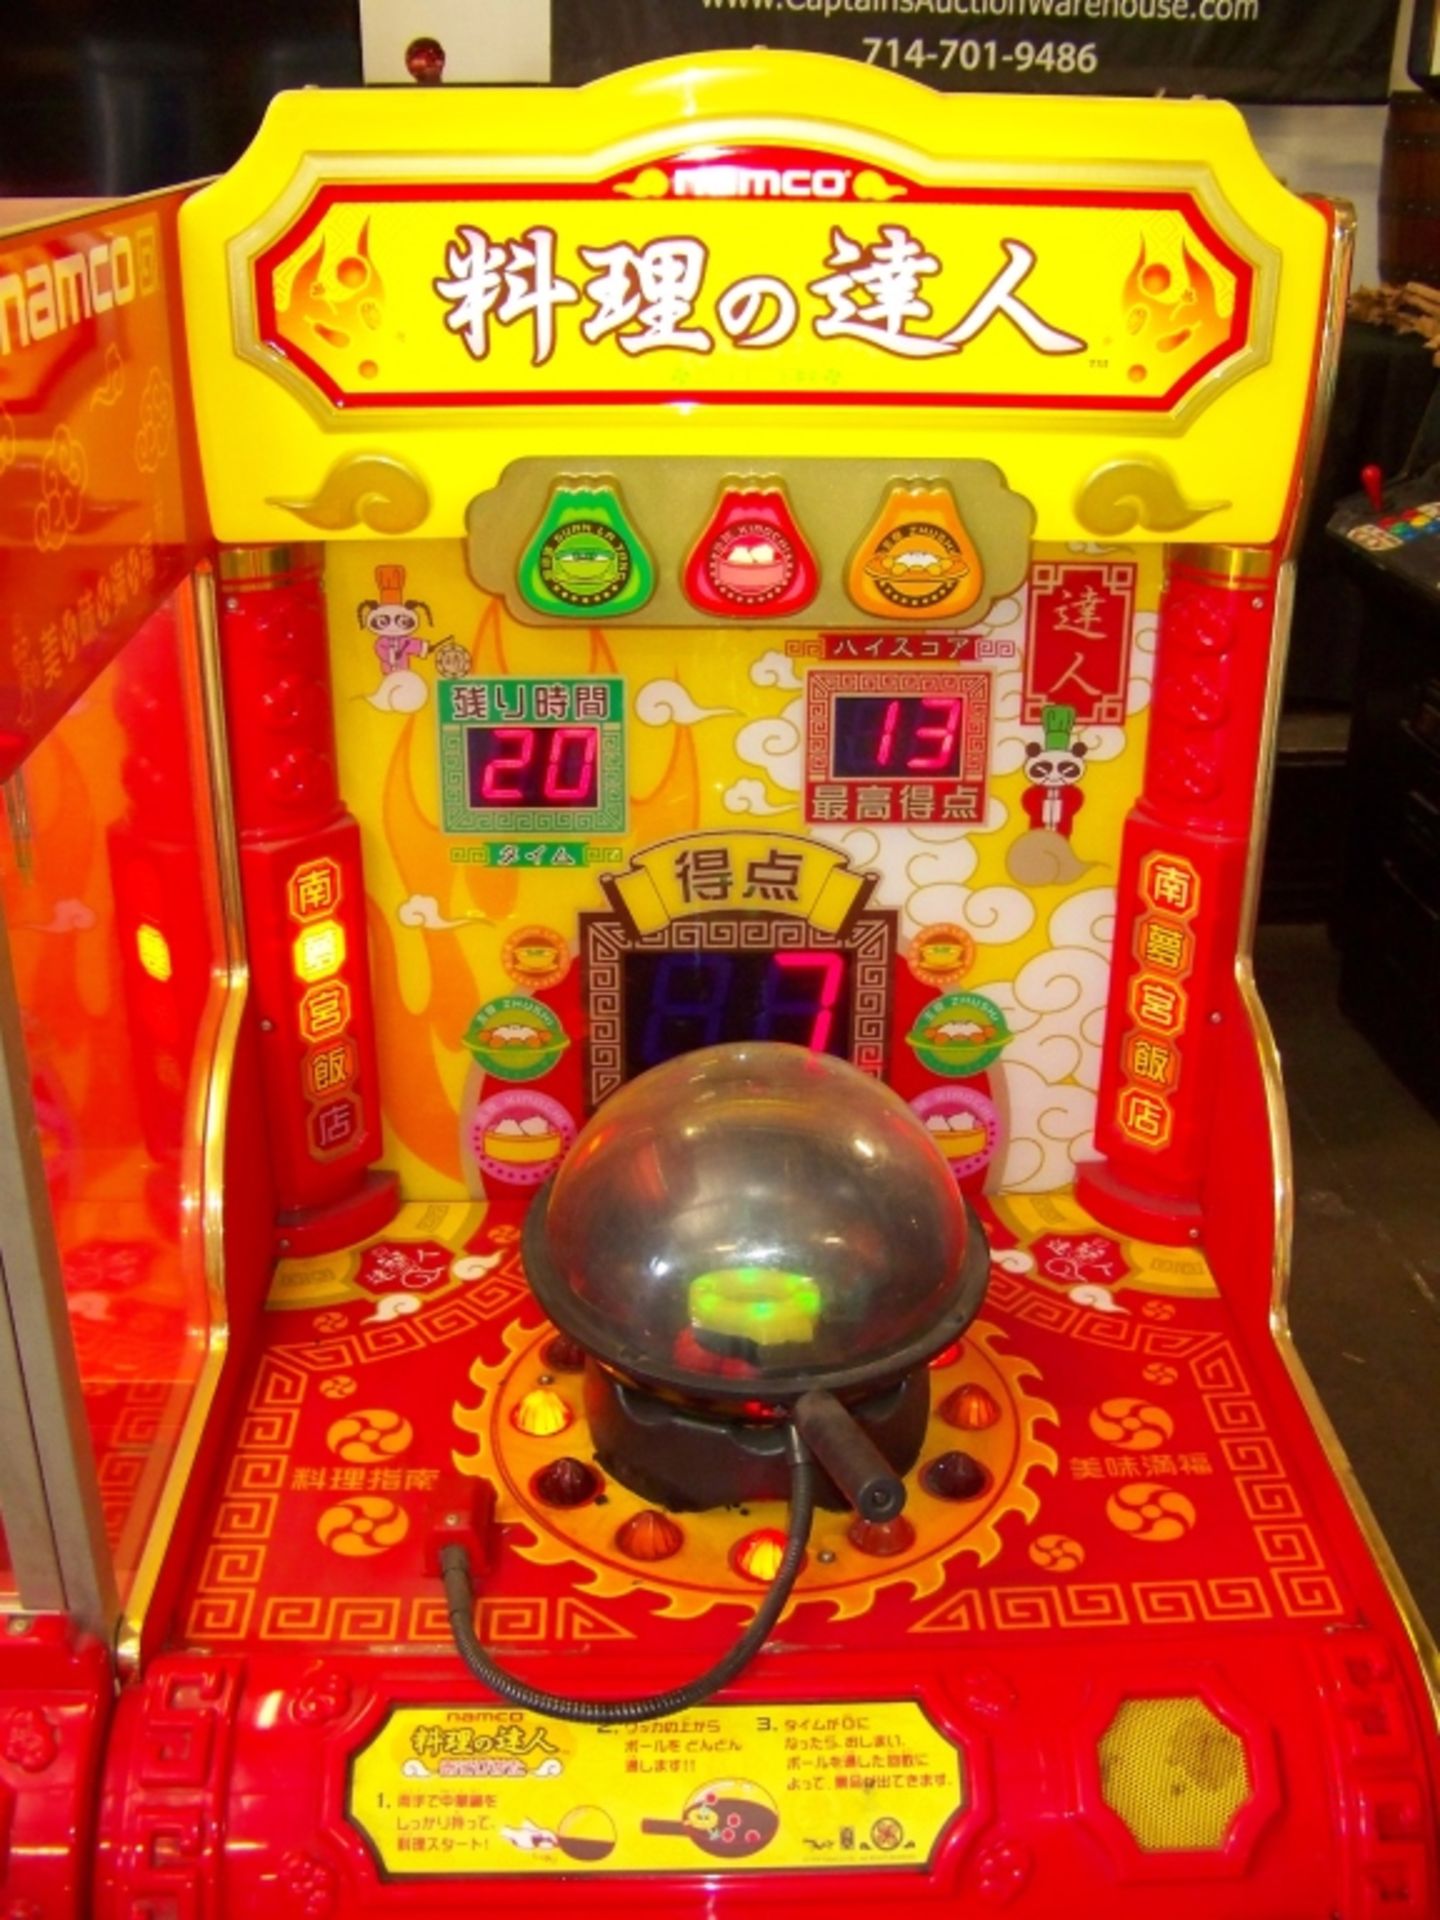 MASTER CHEF PRIZE REDEMPTION ARCADE GAME NAMCO Item is in used condition. Evidence of wear and - Image 3 of 8